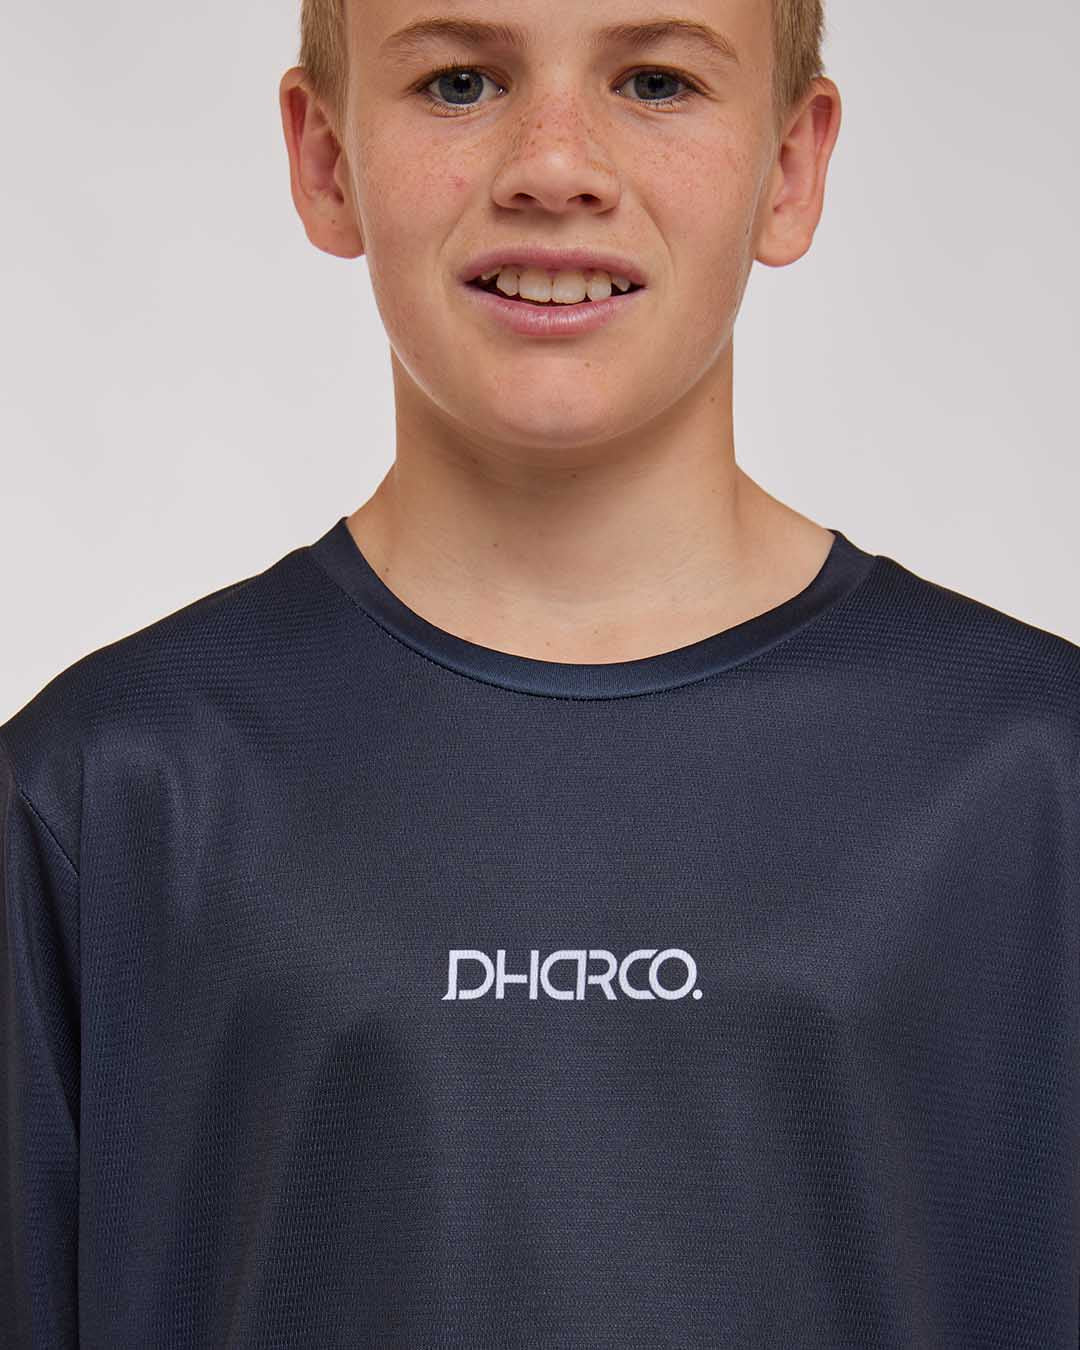 DHaRCO   YOUTH GRAVITY JERSEY  Stealth